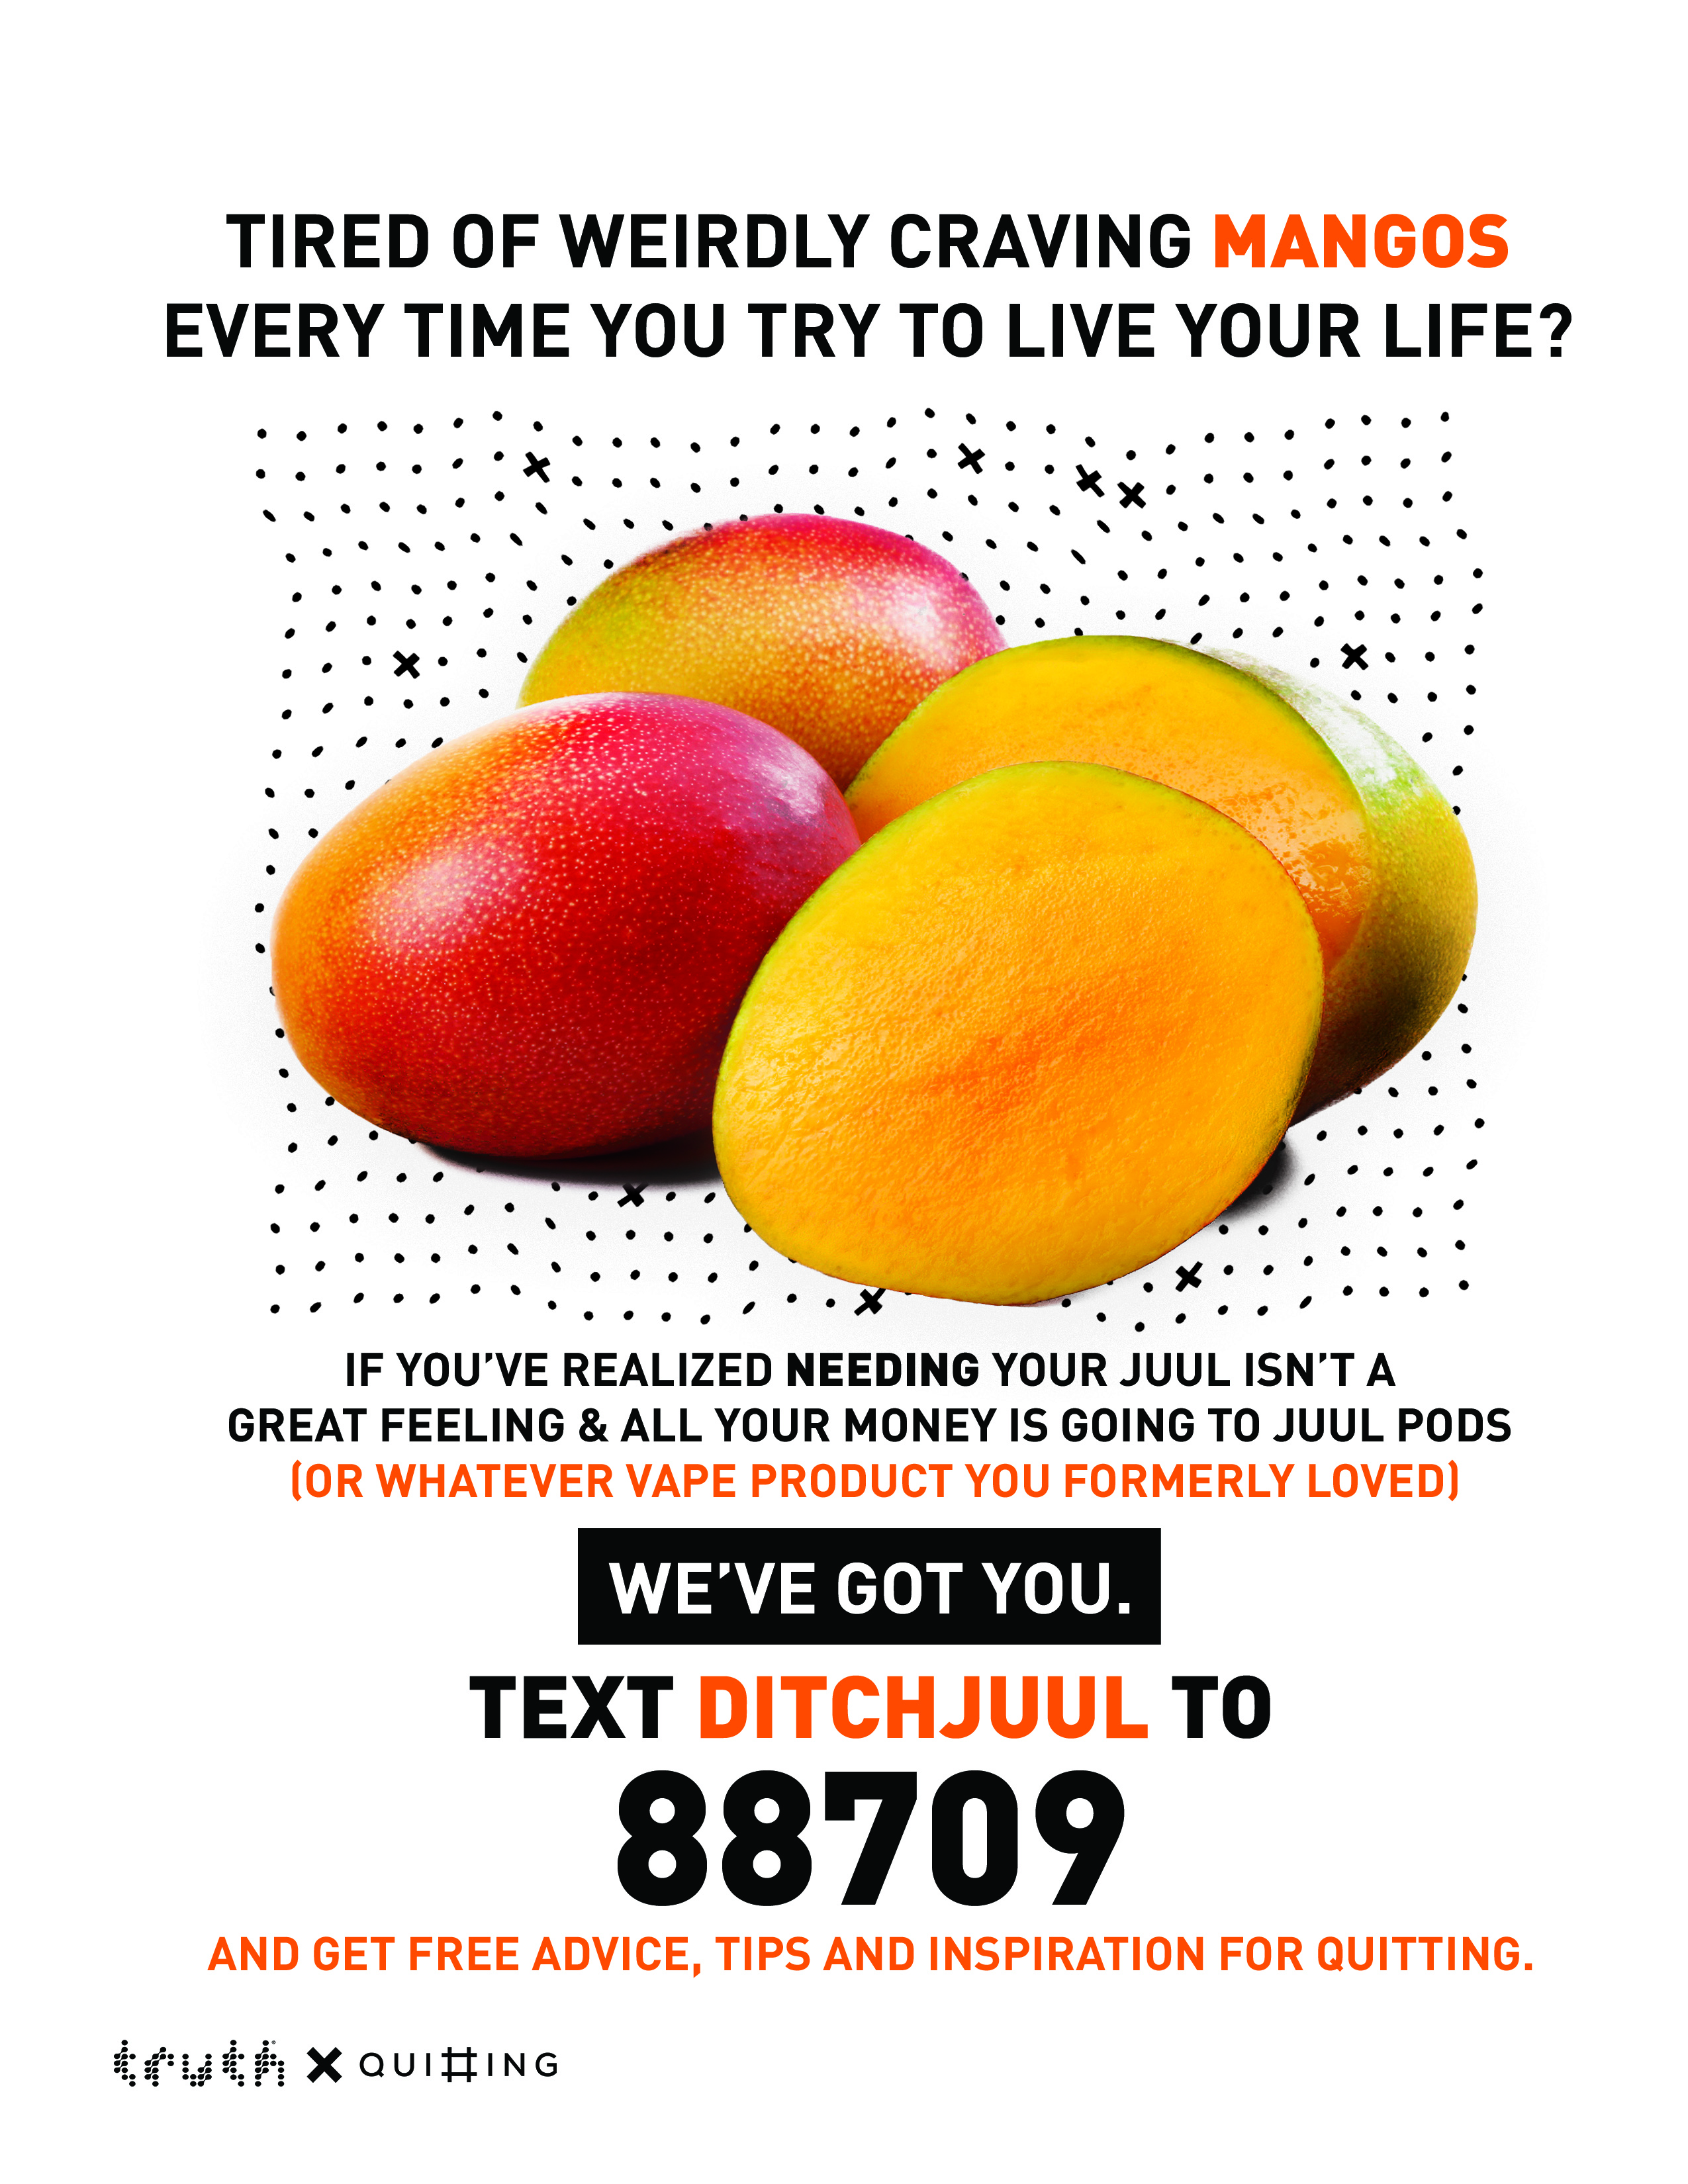 Vaping cessation flyer with mangoes to represent mango-flavored Juul pods.  